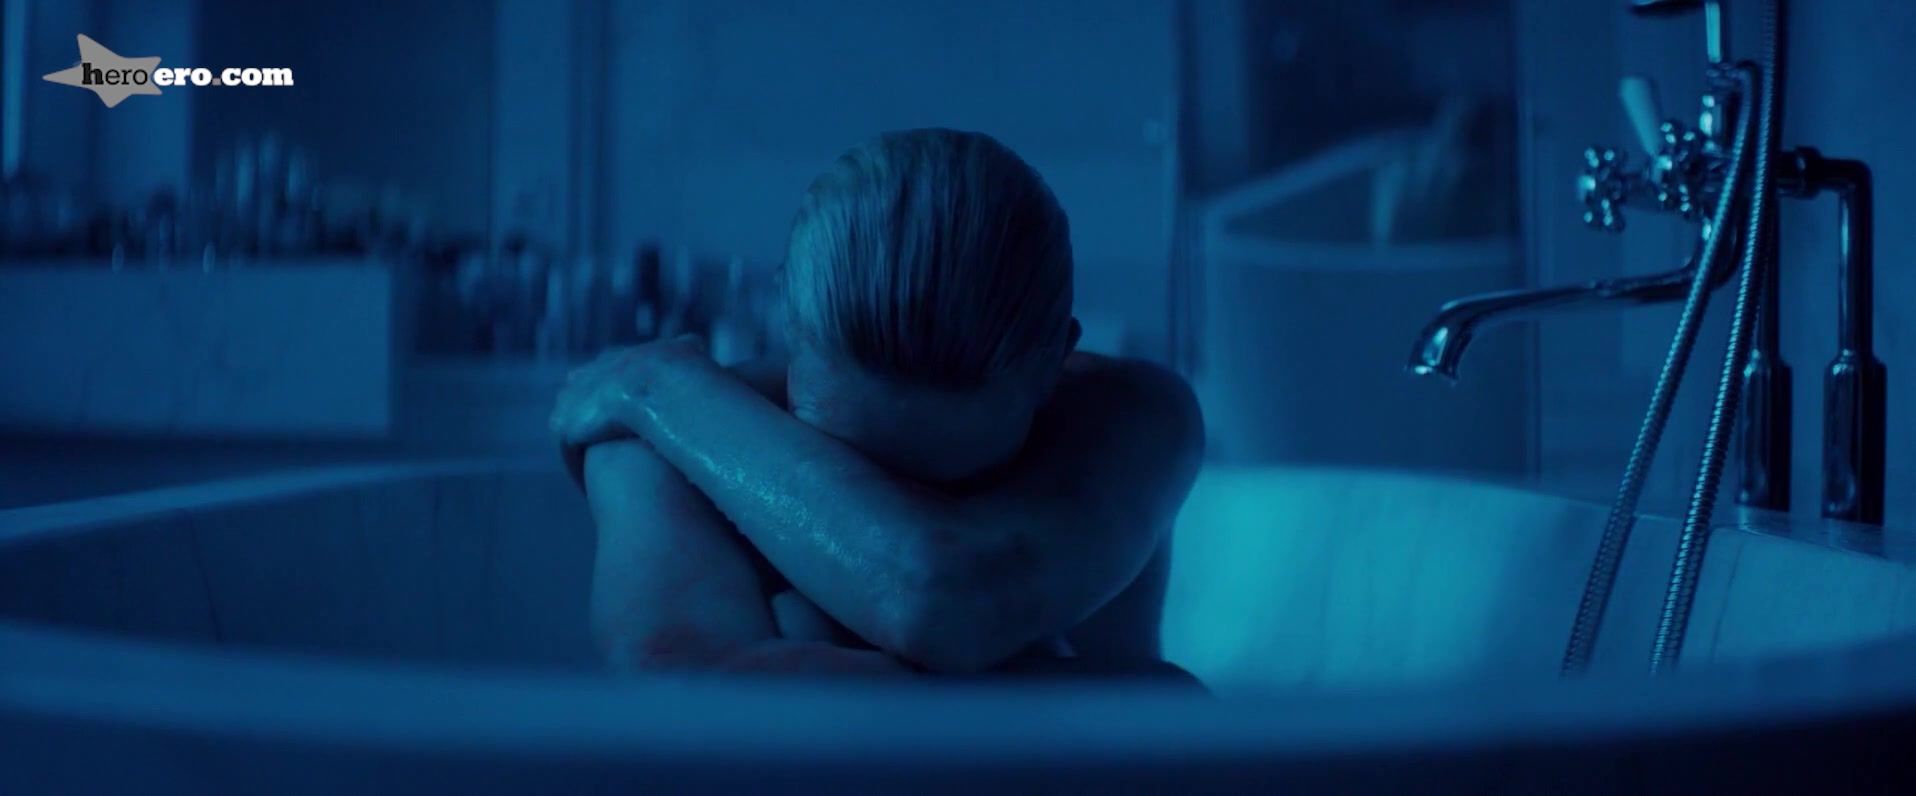 Nasty Charlize Theron, Sofia Boutella Nude - Atomic Blonde (US 2017) Gay Rimming - 2